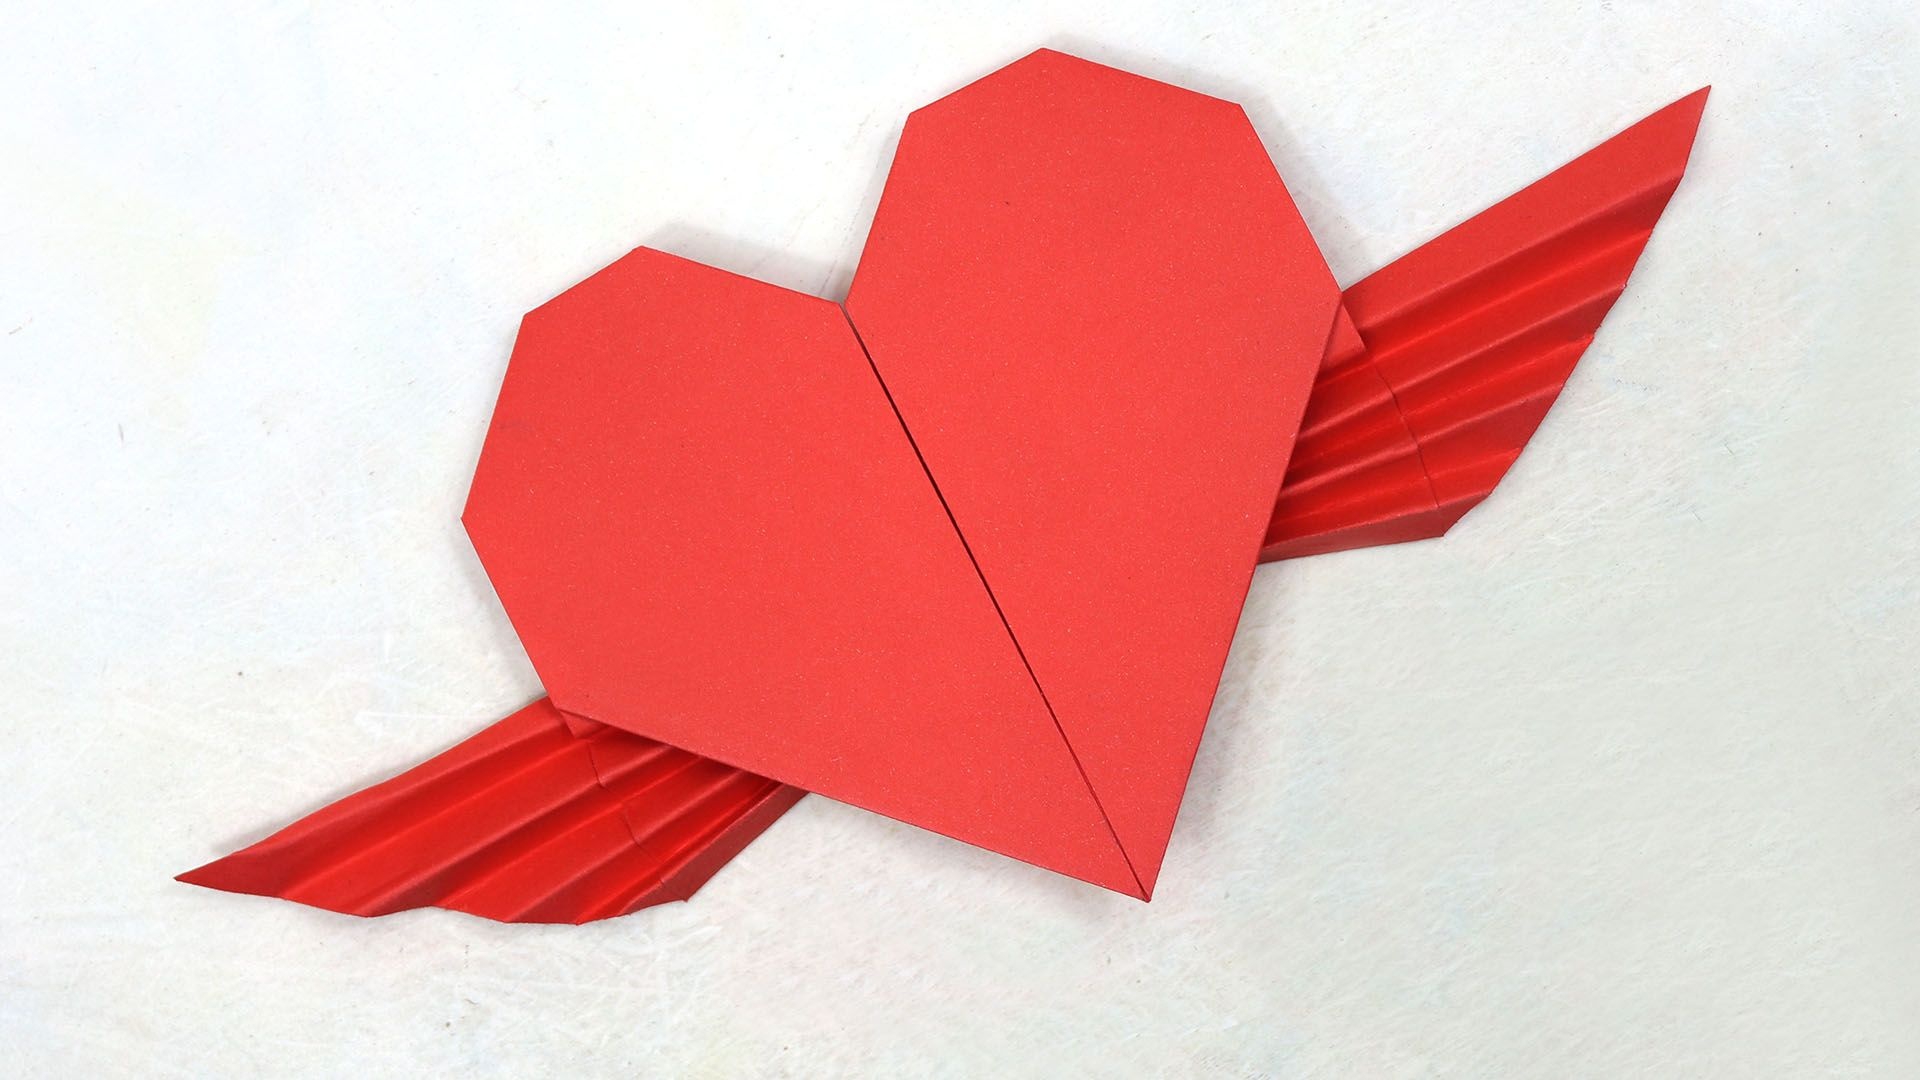 Heart With Wings, Paper craft, Origami winged heart, Valentine's Day DIY, 1920x1080 Full HD Desktop